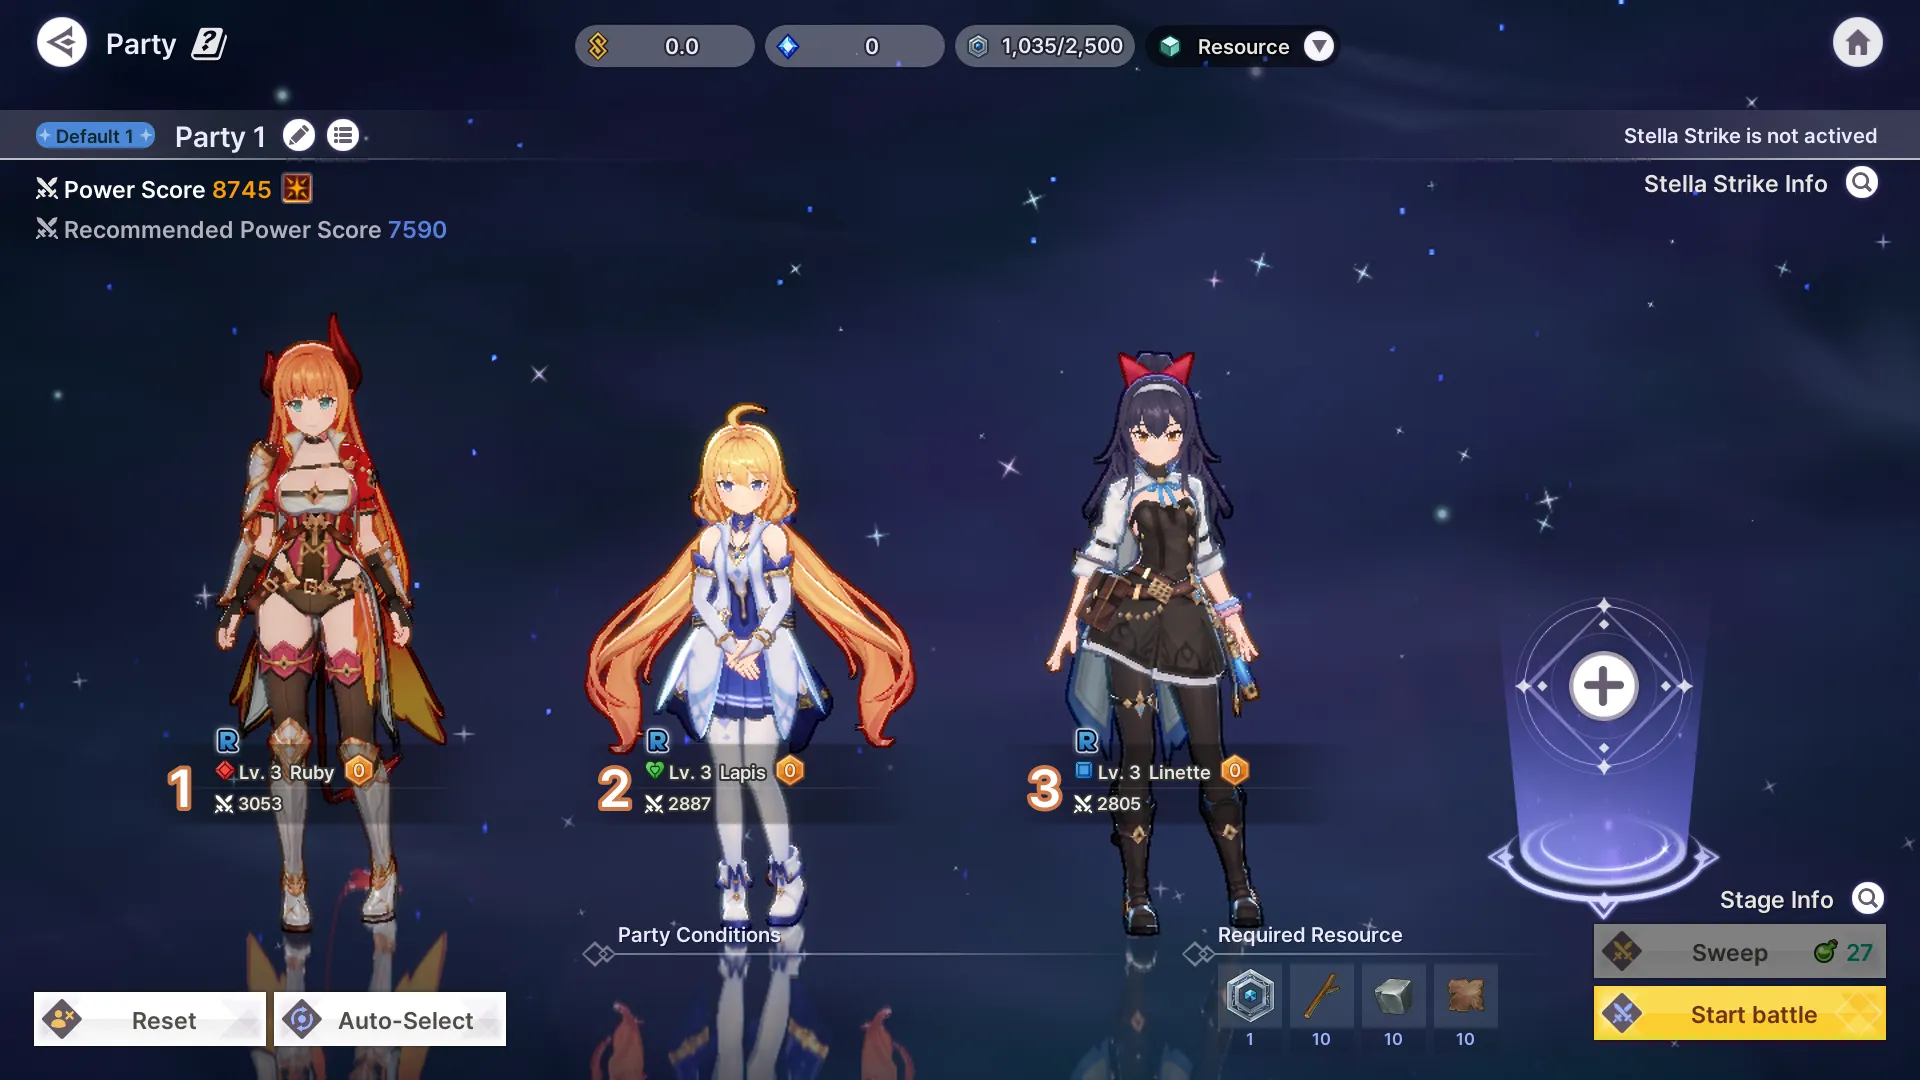 To clear dungeons, you can use up to four playable characters. Each stage recommends a power source to complete it, and you can view your current power score in this tab.